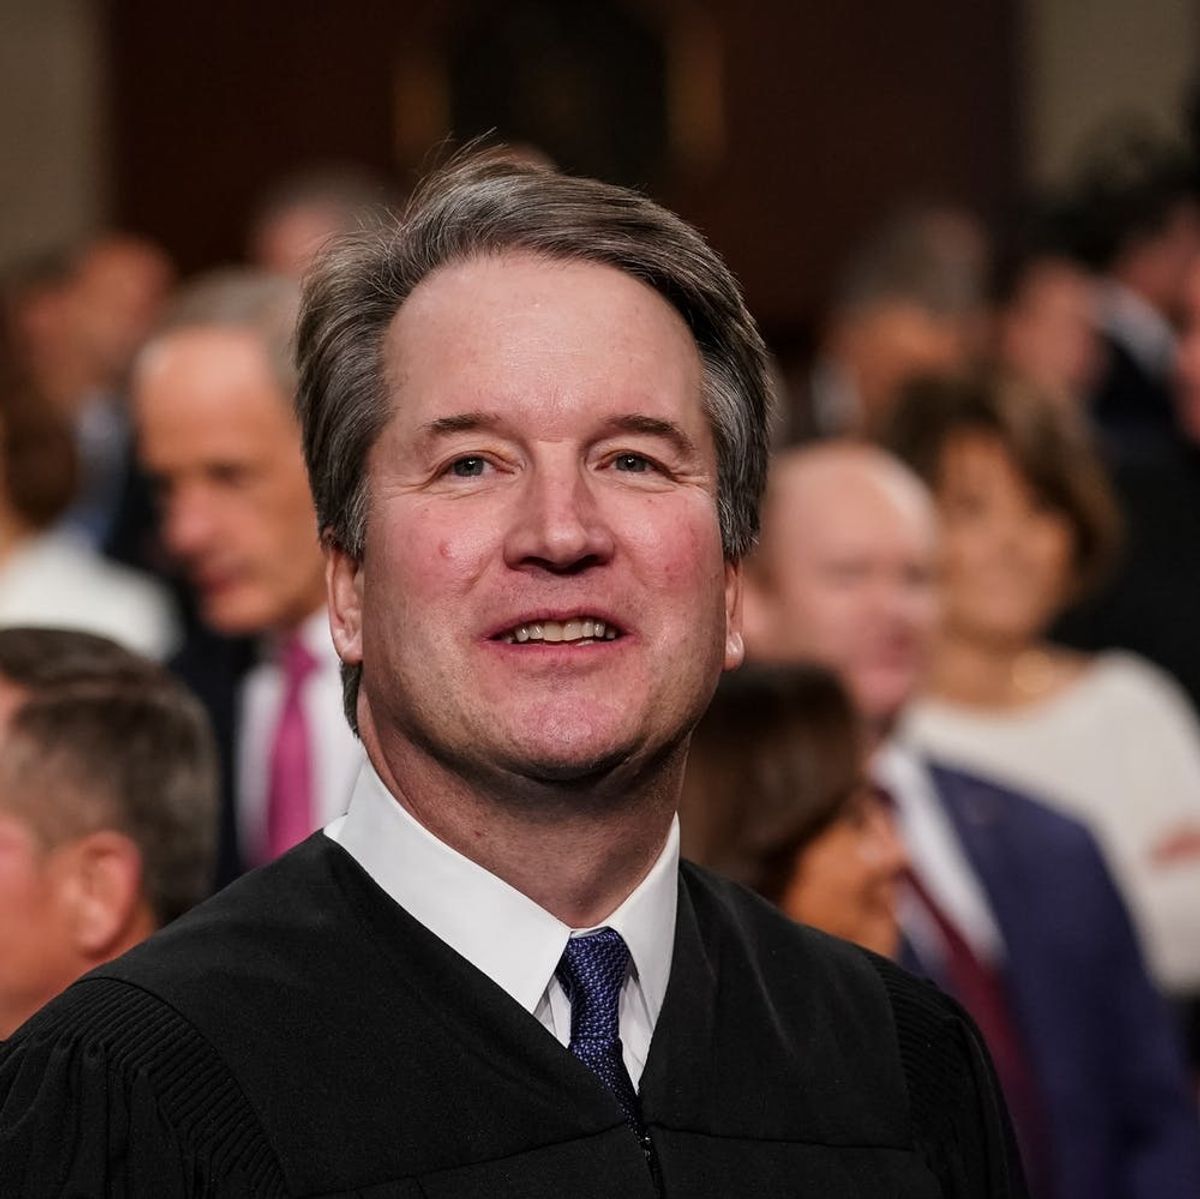 With Louisiana Abortion Case, Brett Kavanaugh Confirmed Abortion Rights Advocates’ Fears